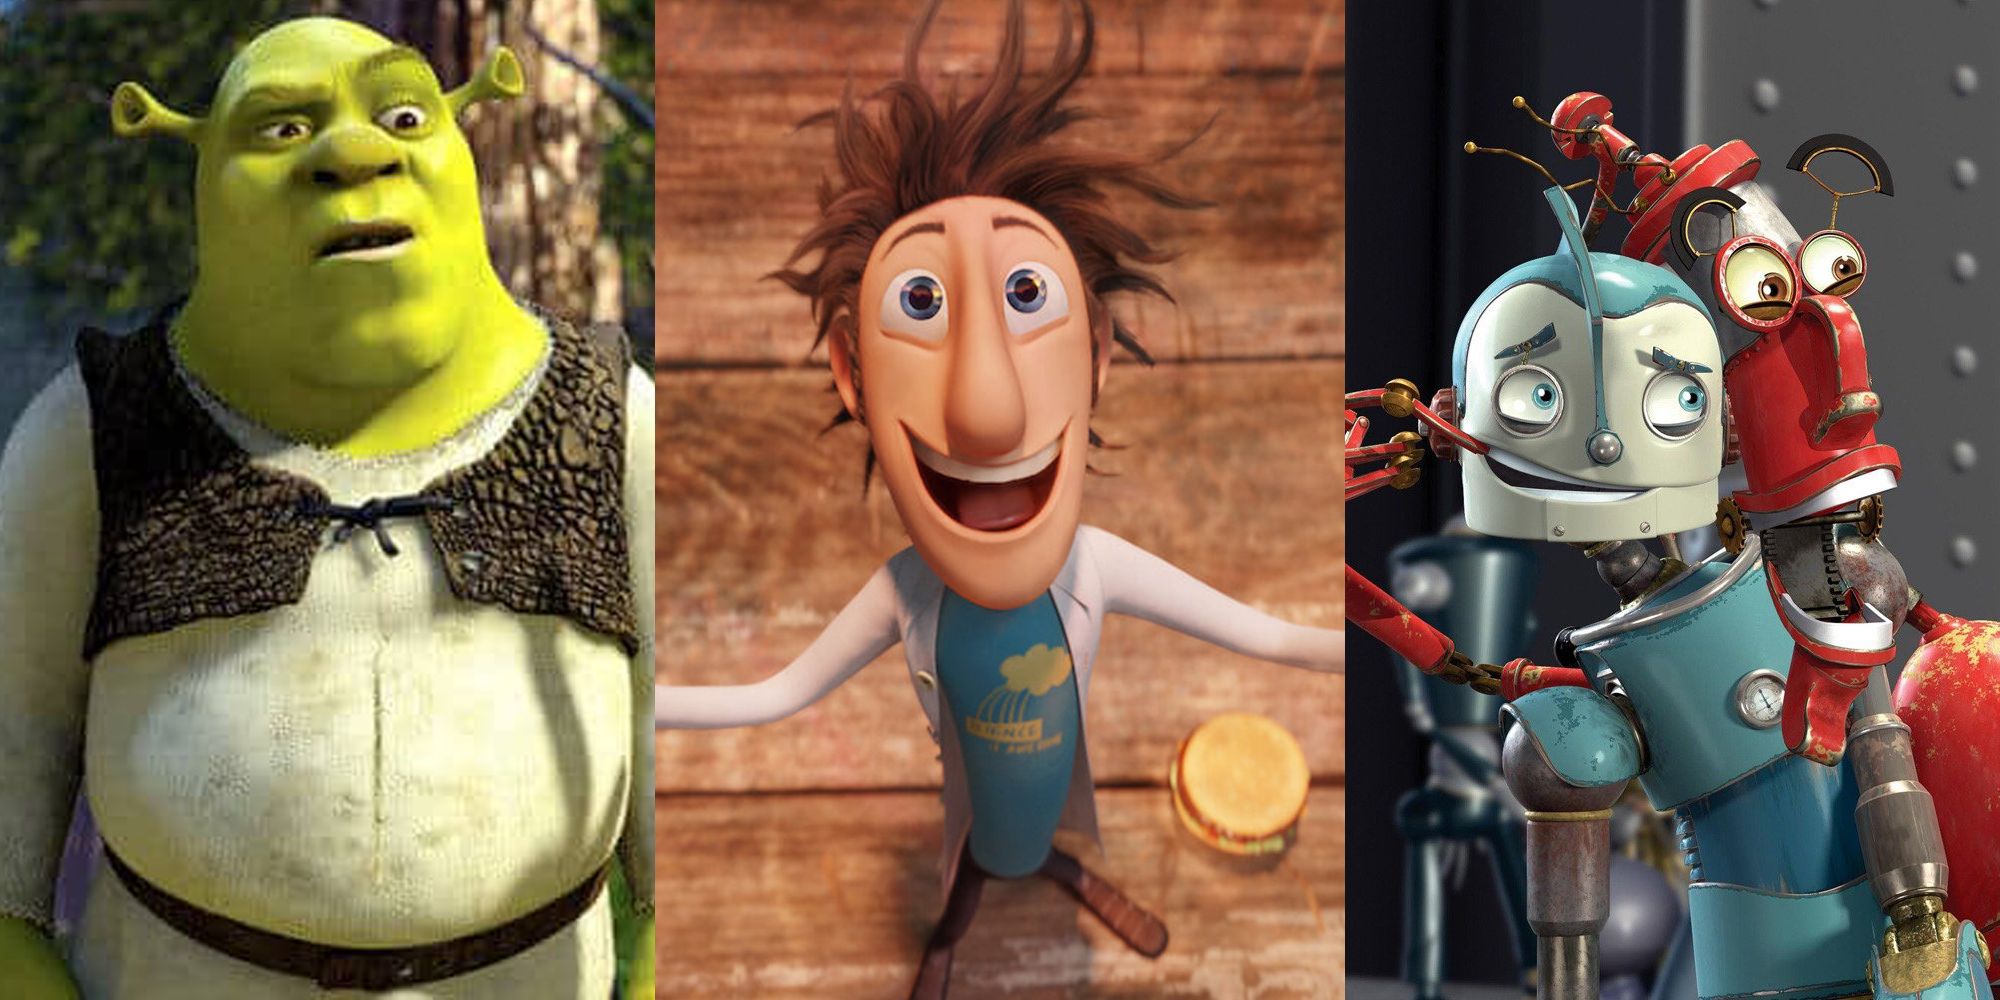 Shrek, Cloudy With a Chance of Meatballs' Flint Lockwood, Robots' Rodney and Fender